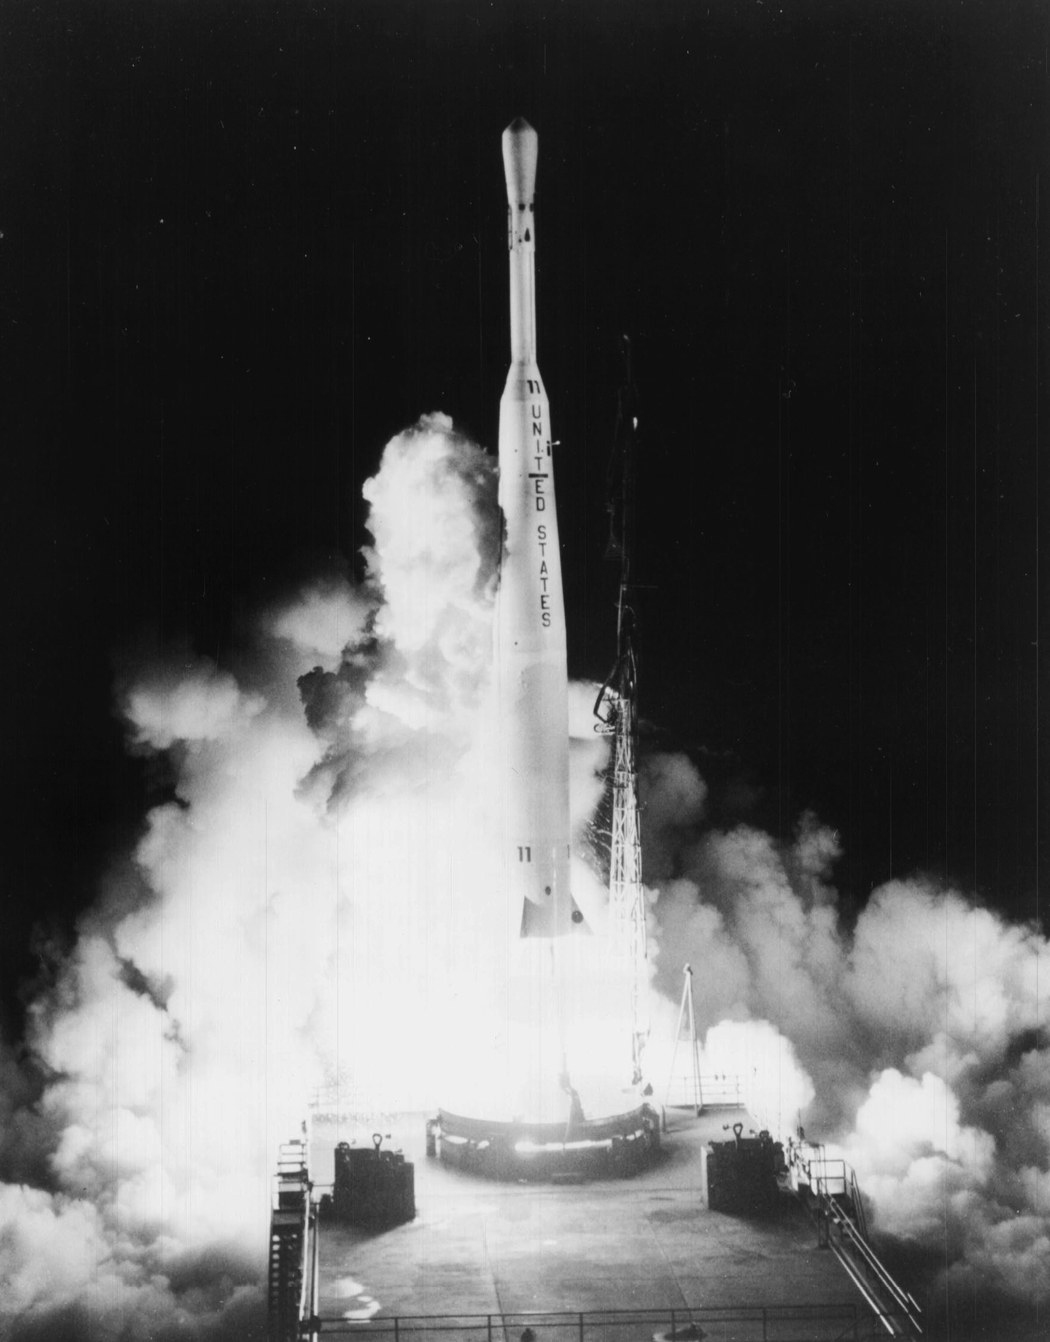 Thor/Delta 316 launches with the Telstar 1 satellite from Cape Canaveral Air Force Station's Space Launch Complex 17B, July 10, 1962.